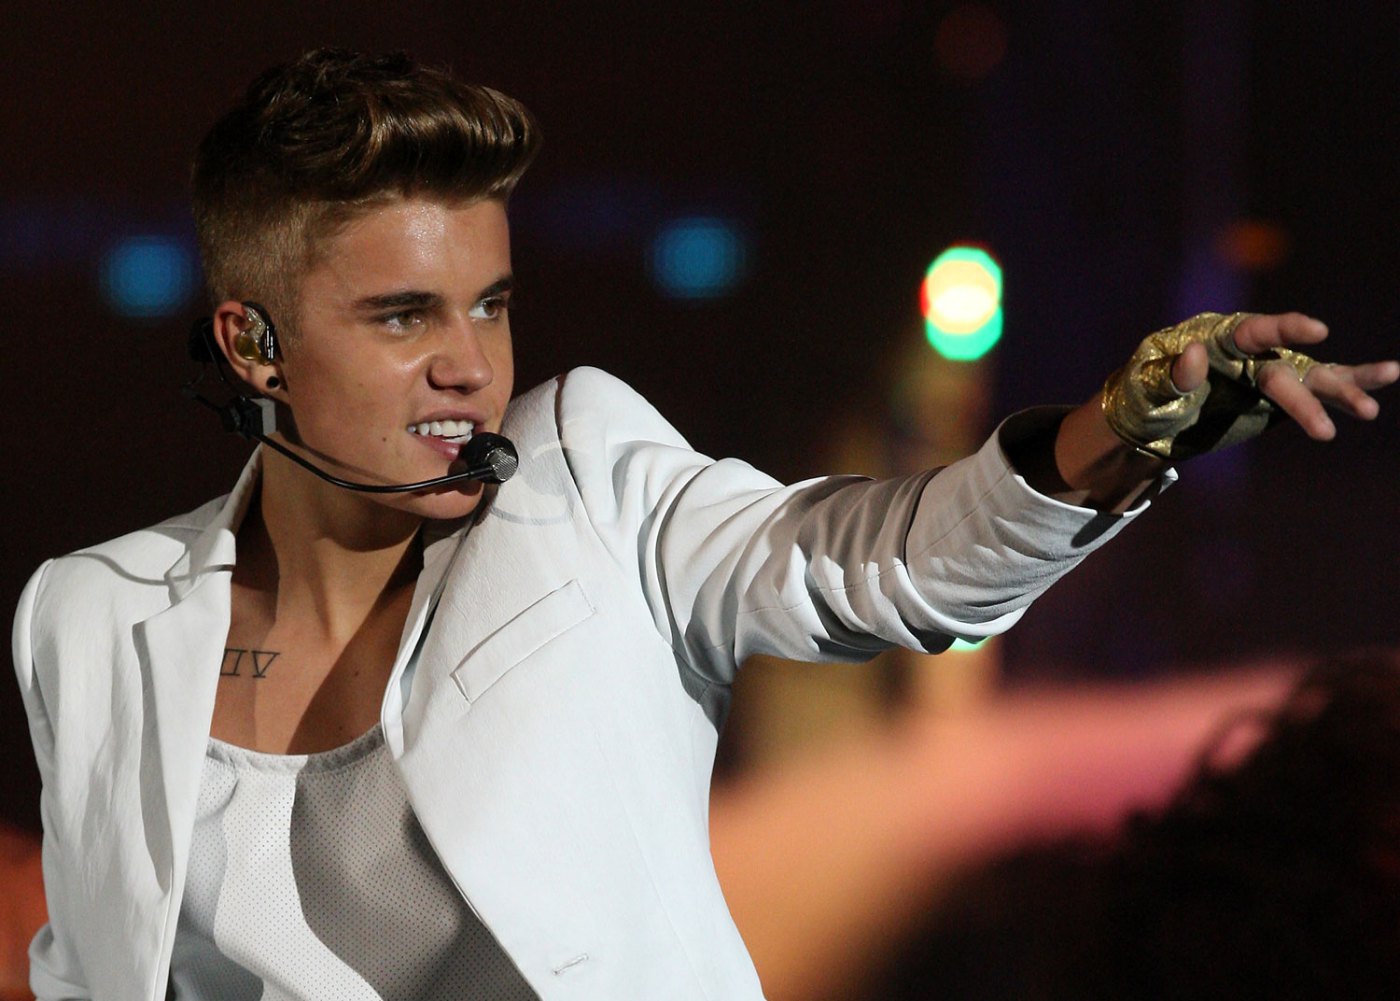 Justin Bieber performs at O2 World in Berlin, on March 31, 2013.